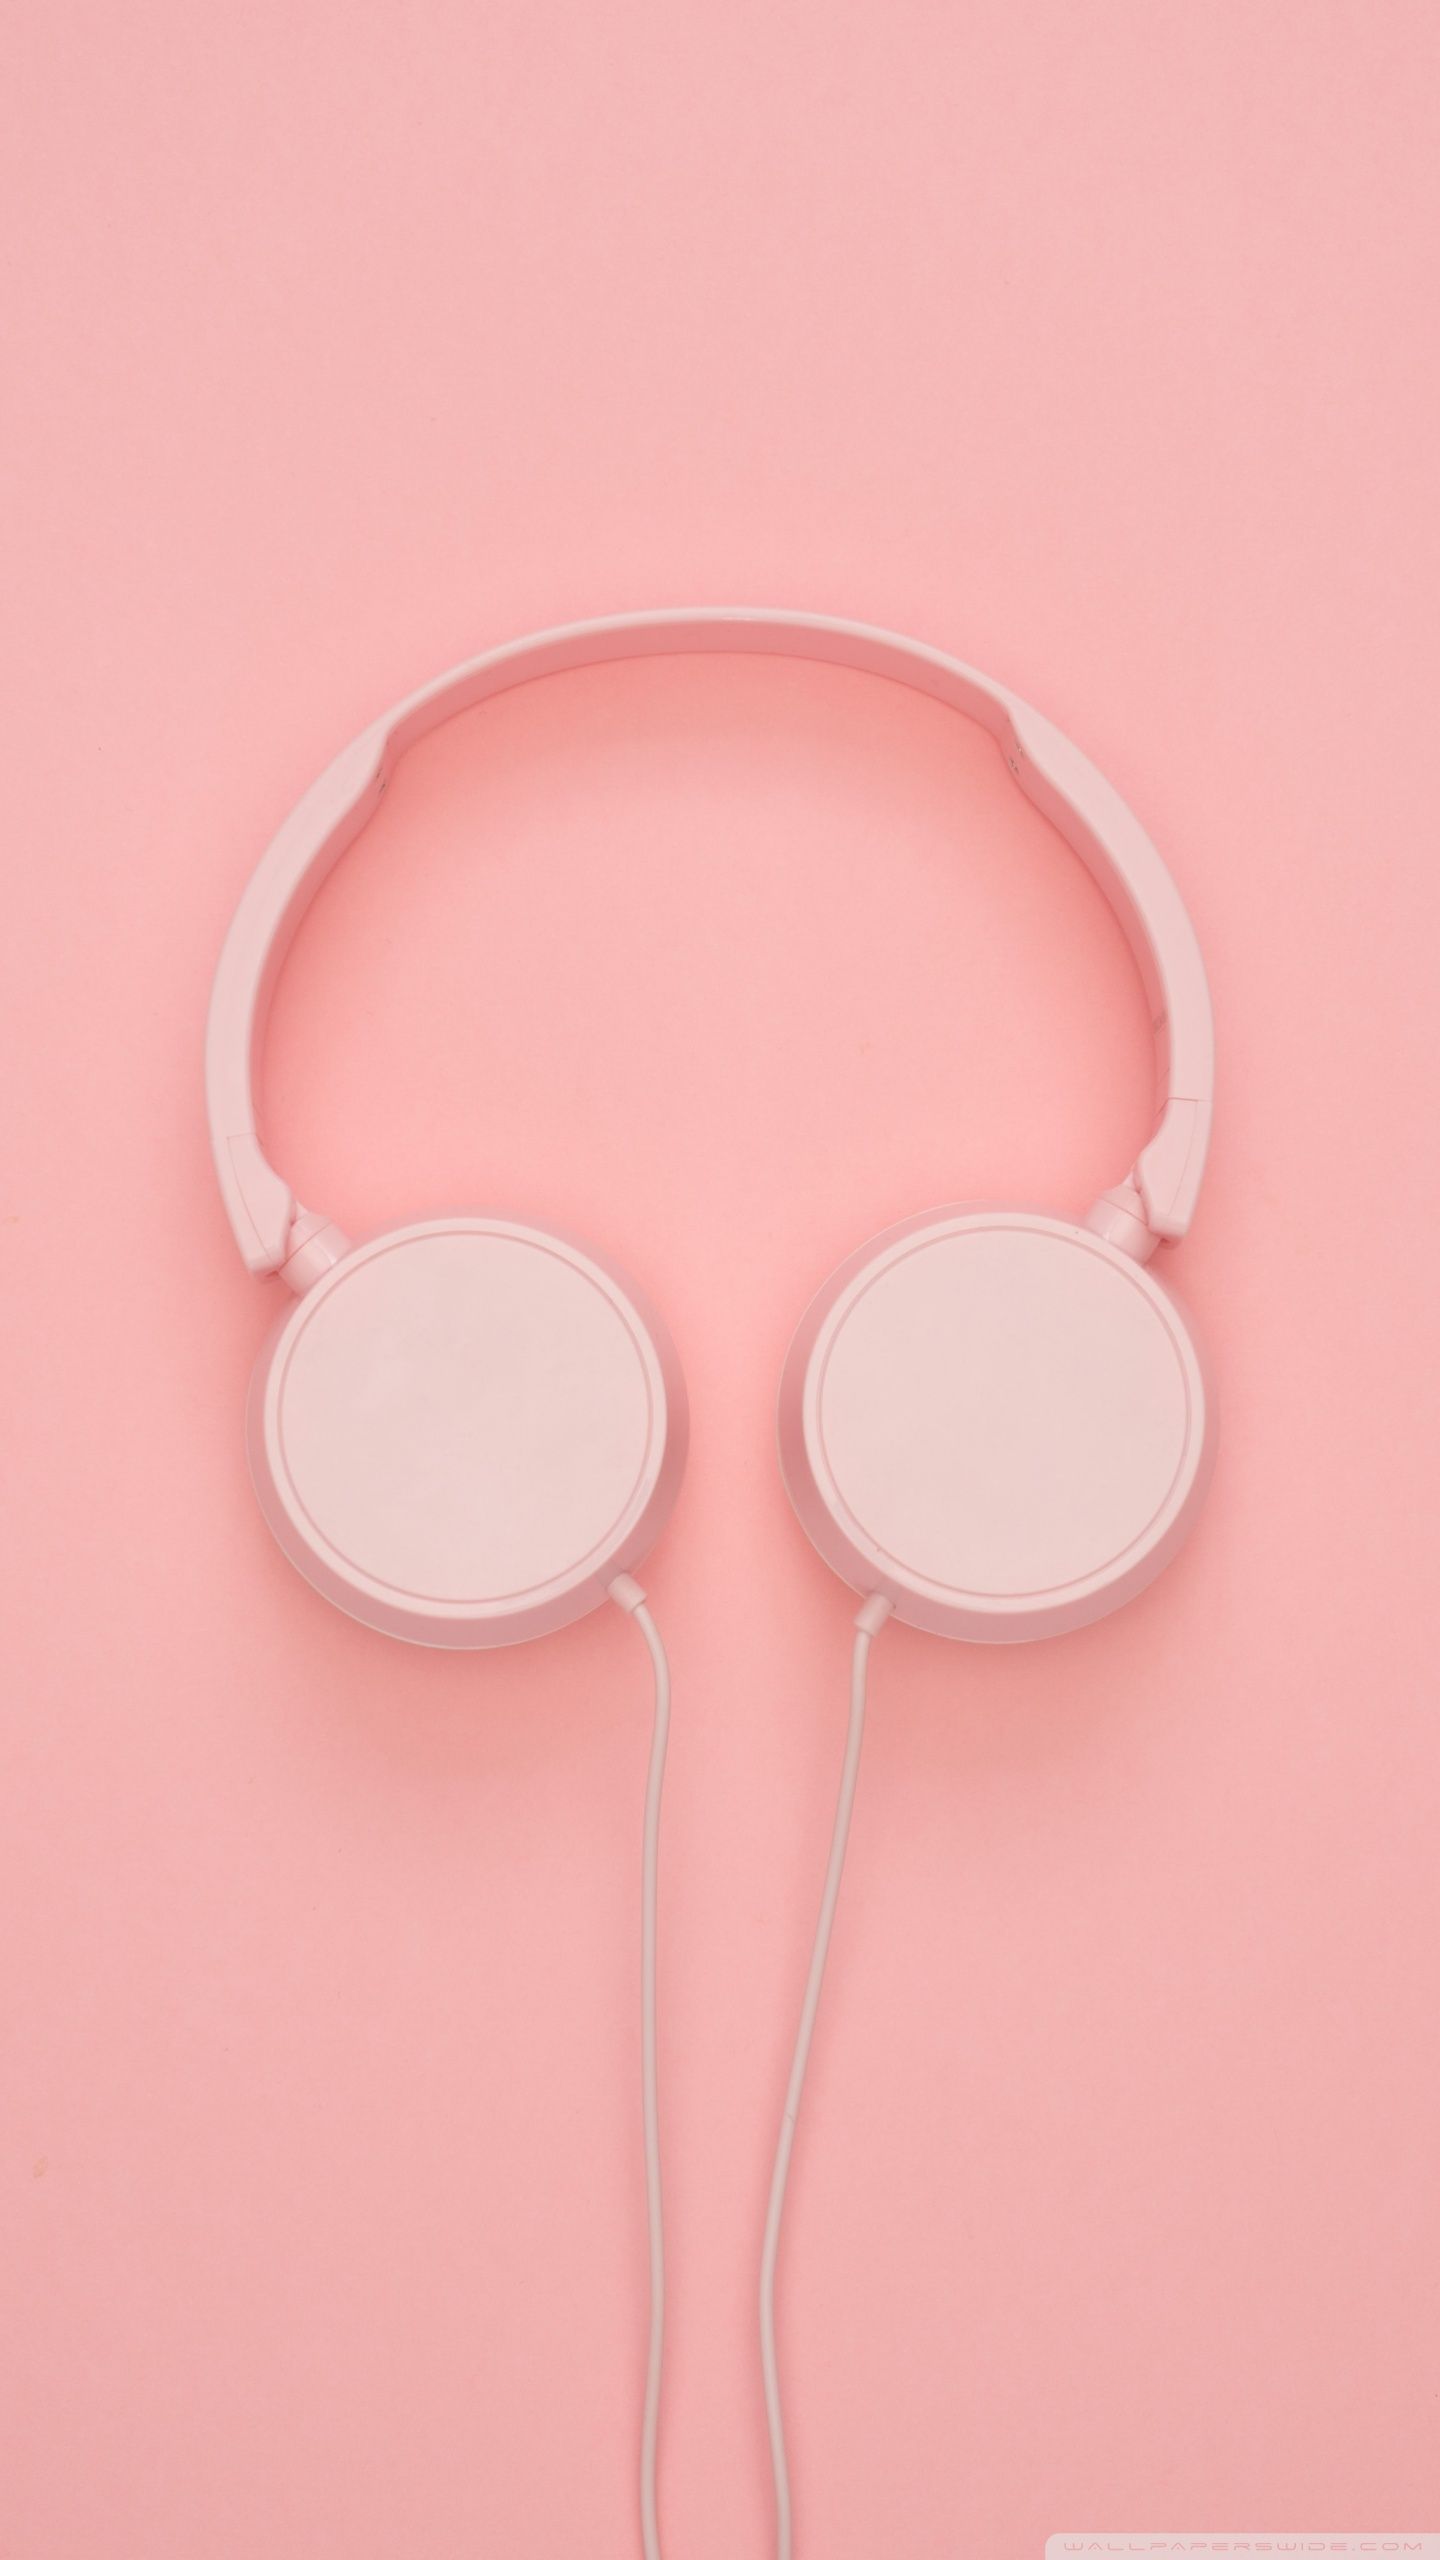 A pair of pink headphones on a pink background - Pink